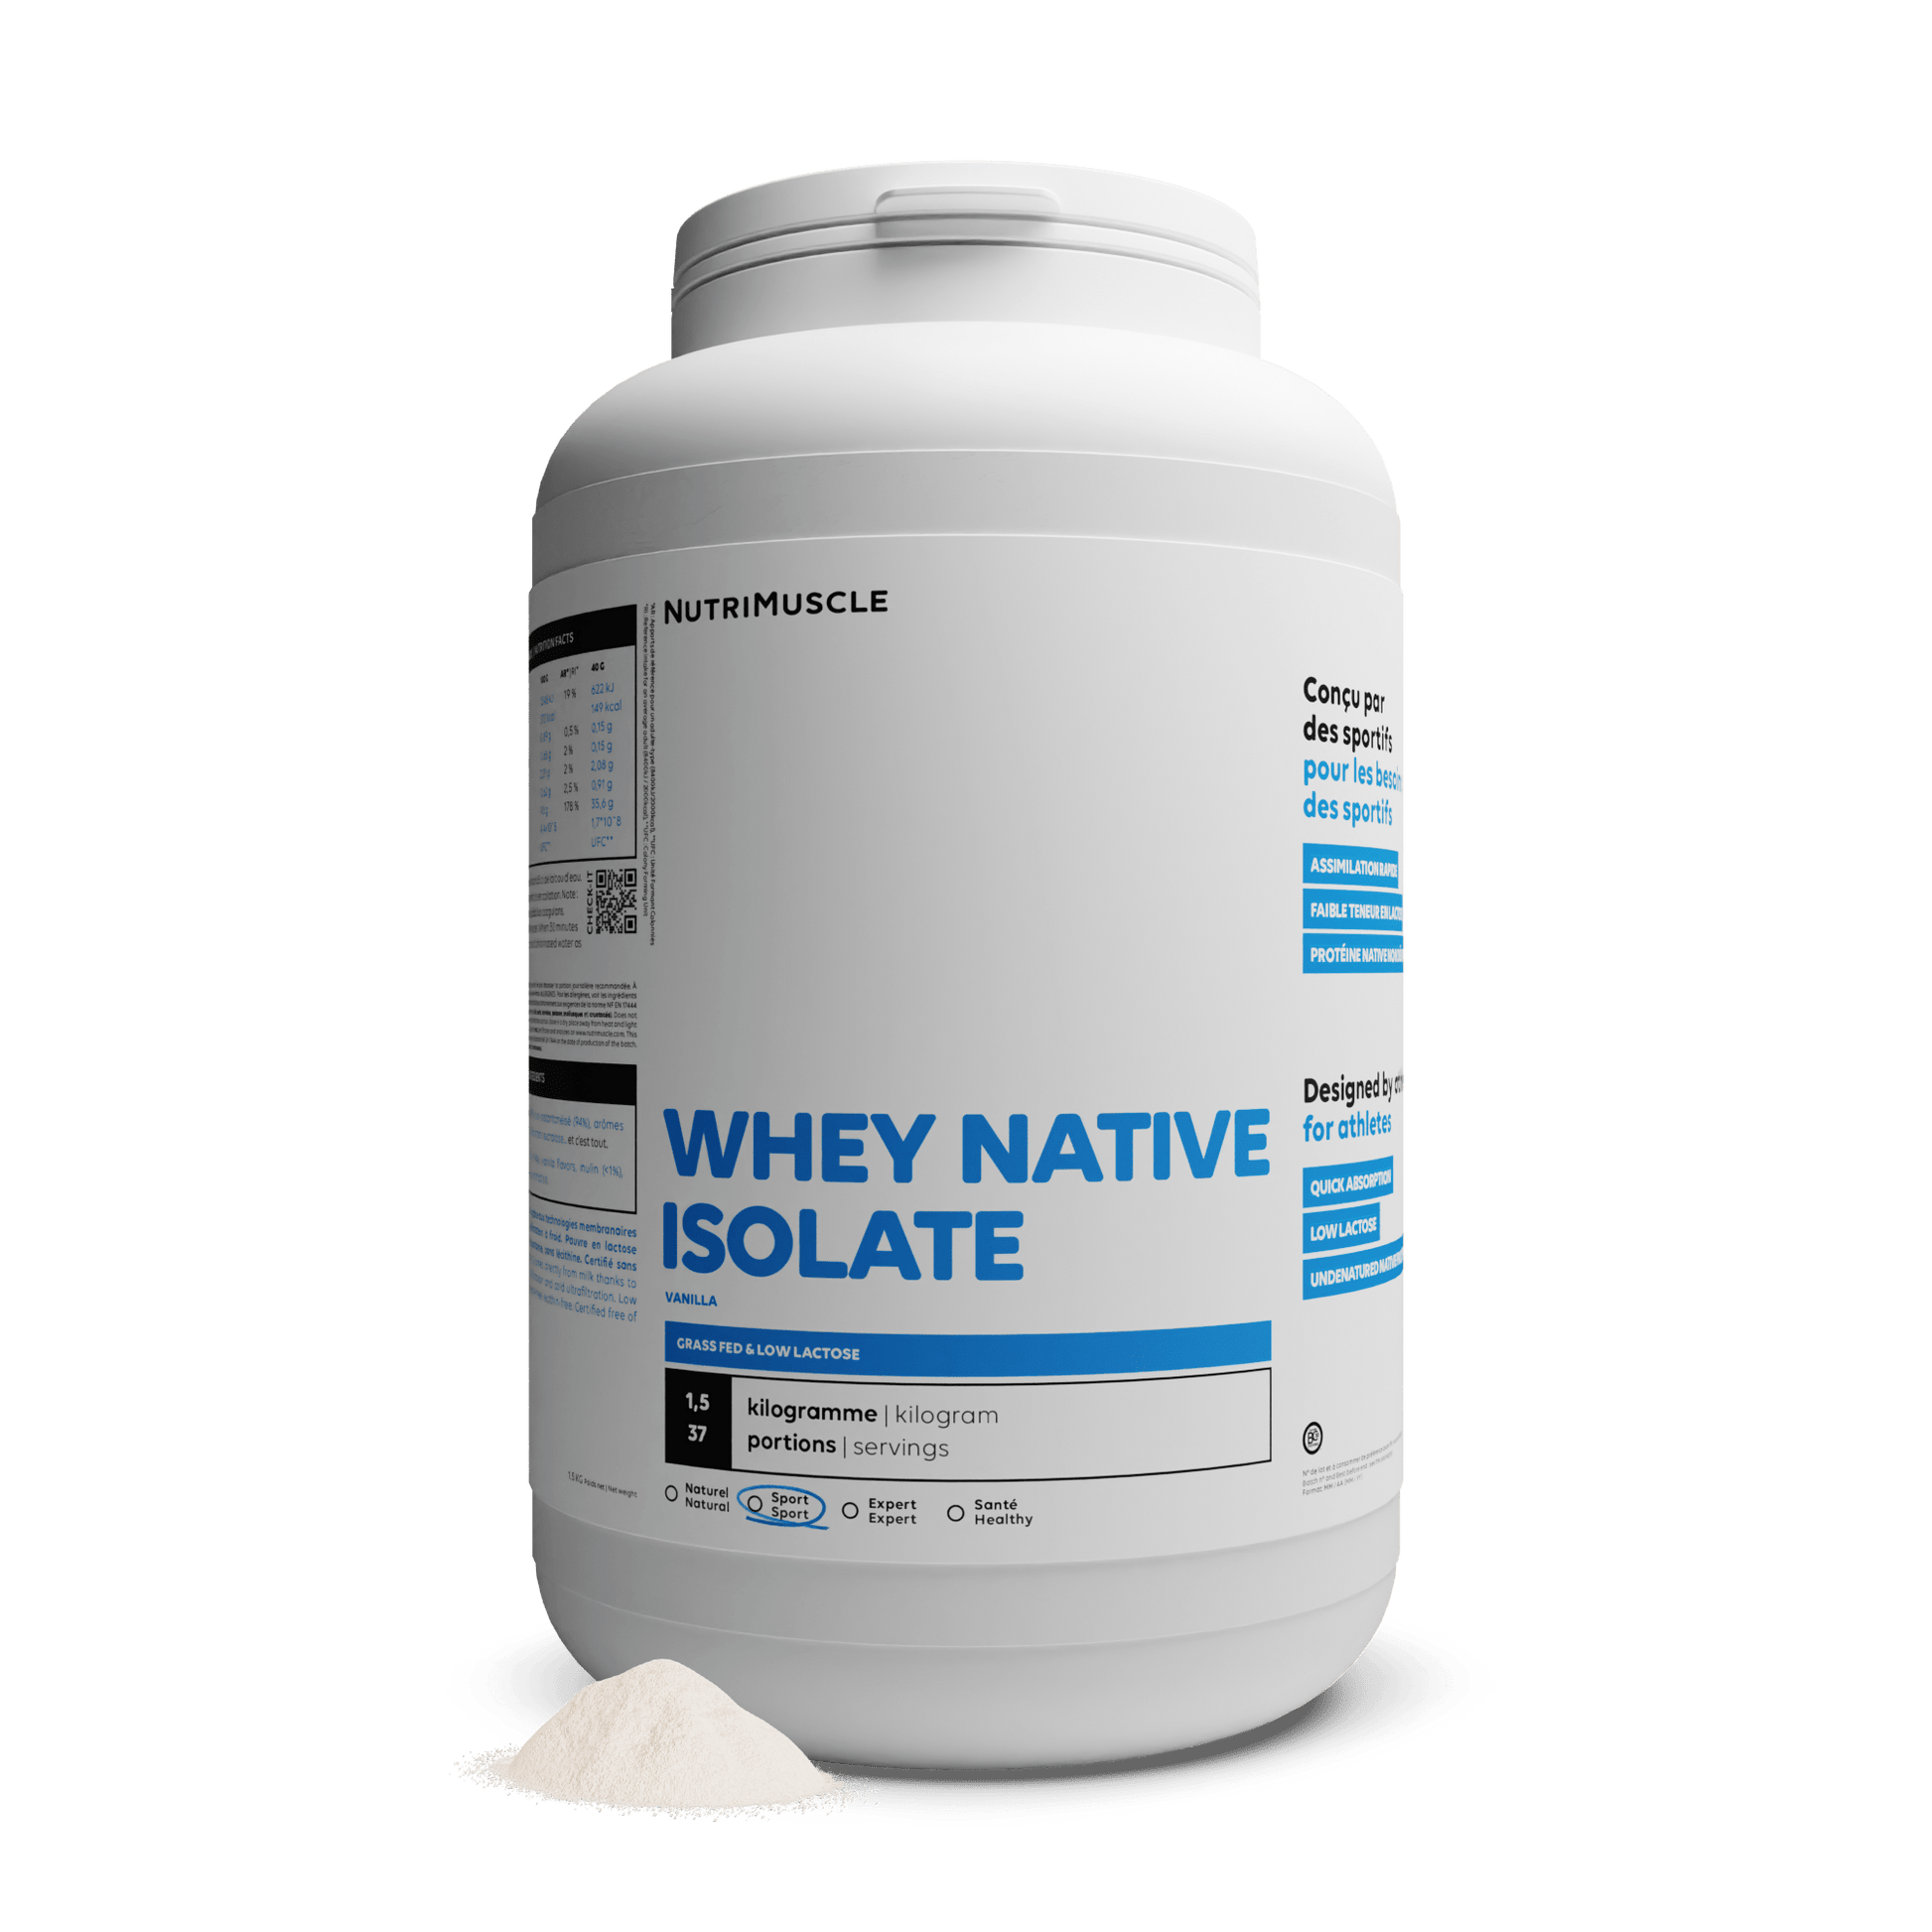 Nutrimuscle Protéines Vanille / 1.50 kg Whey Native Isolate (Low lactose)